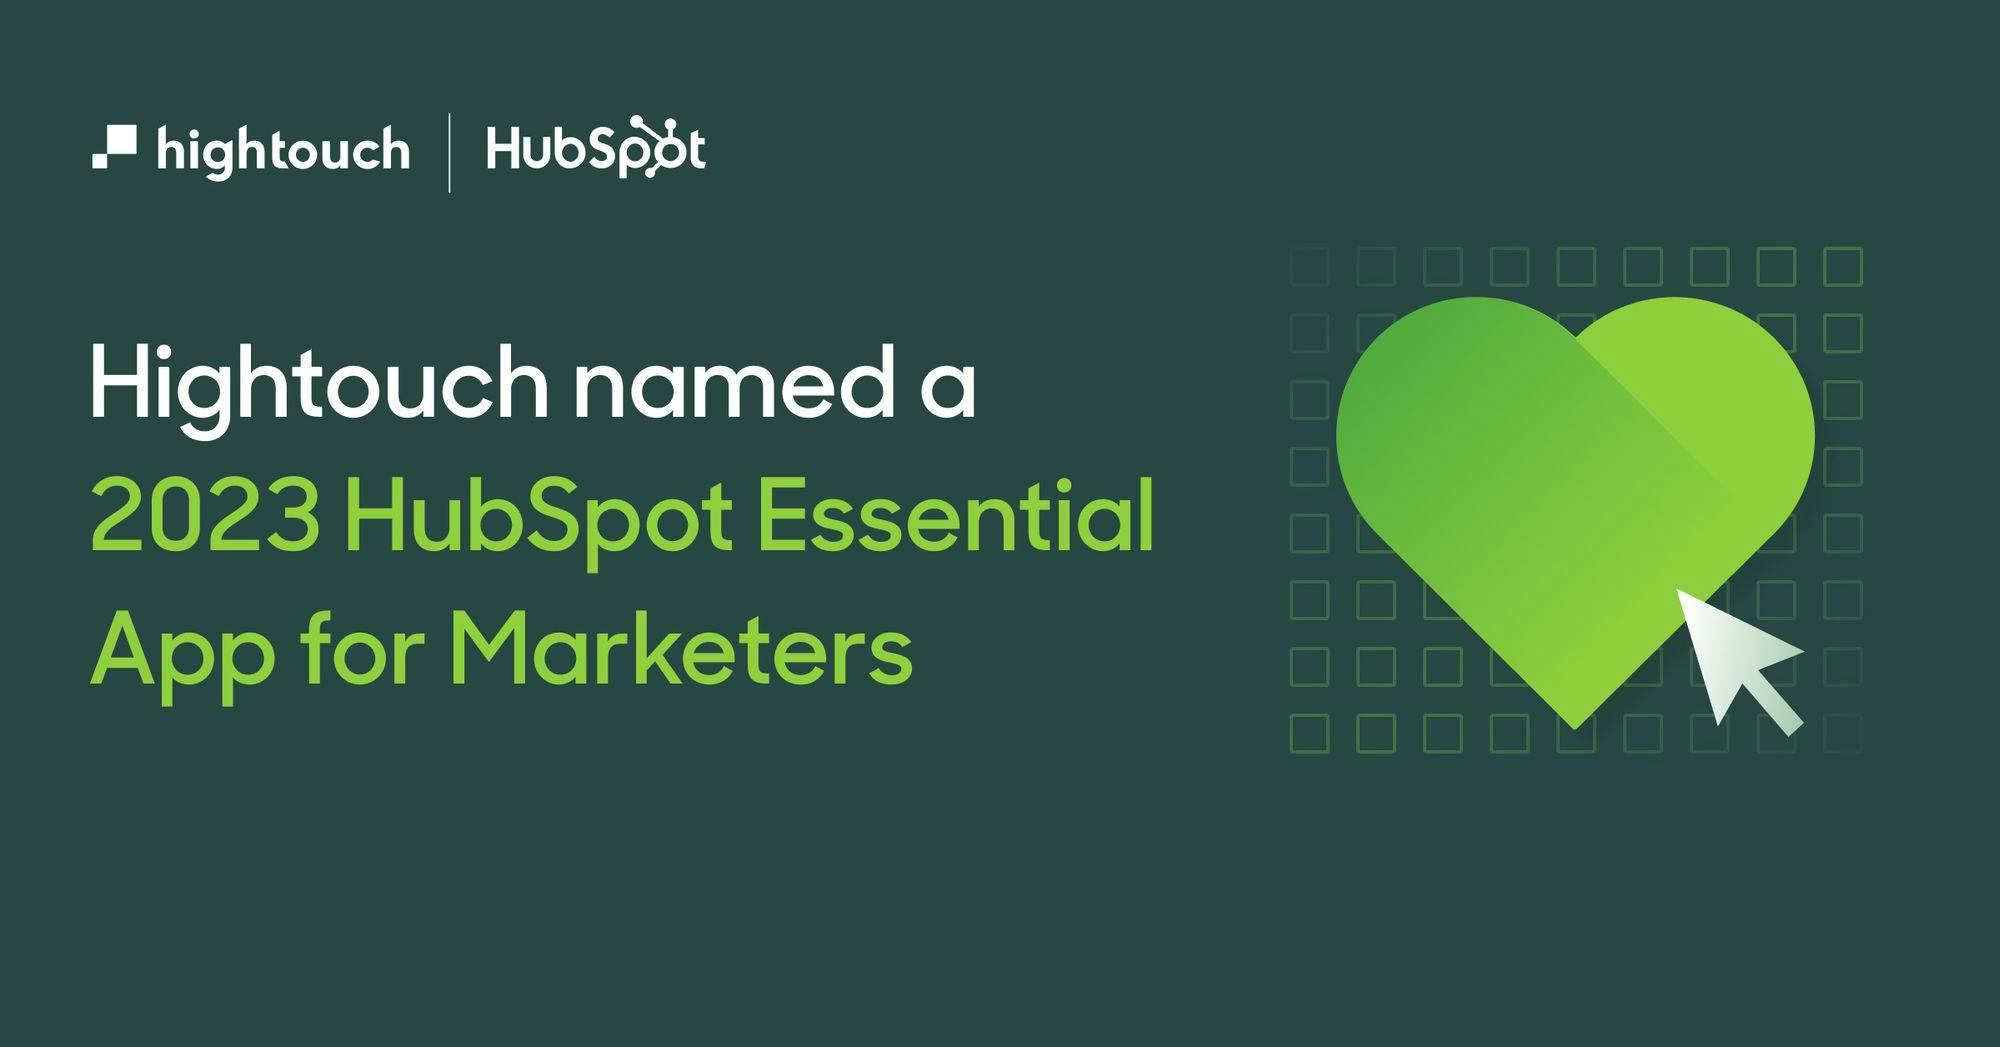 Hightouch named a 2023 HubSpot Essential App for Marketers